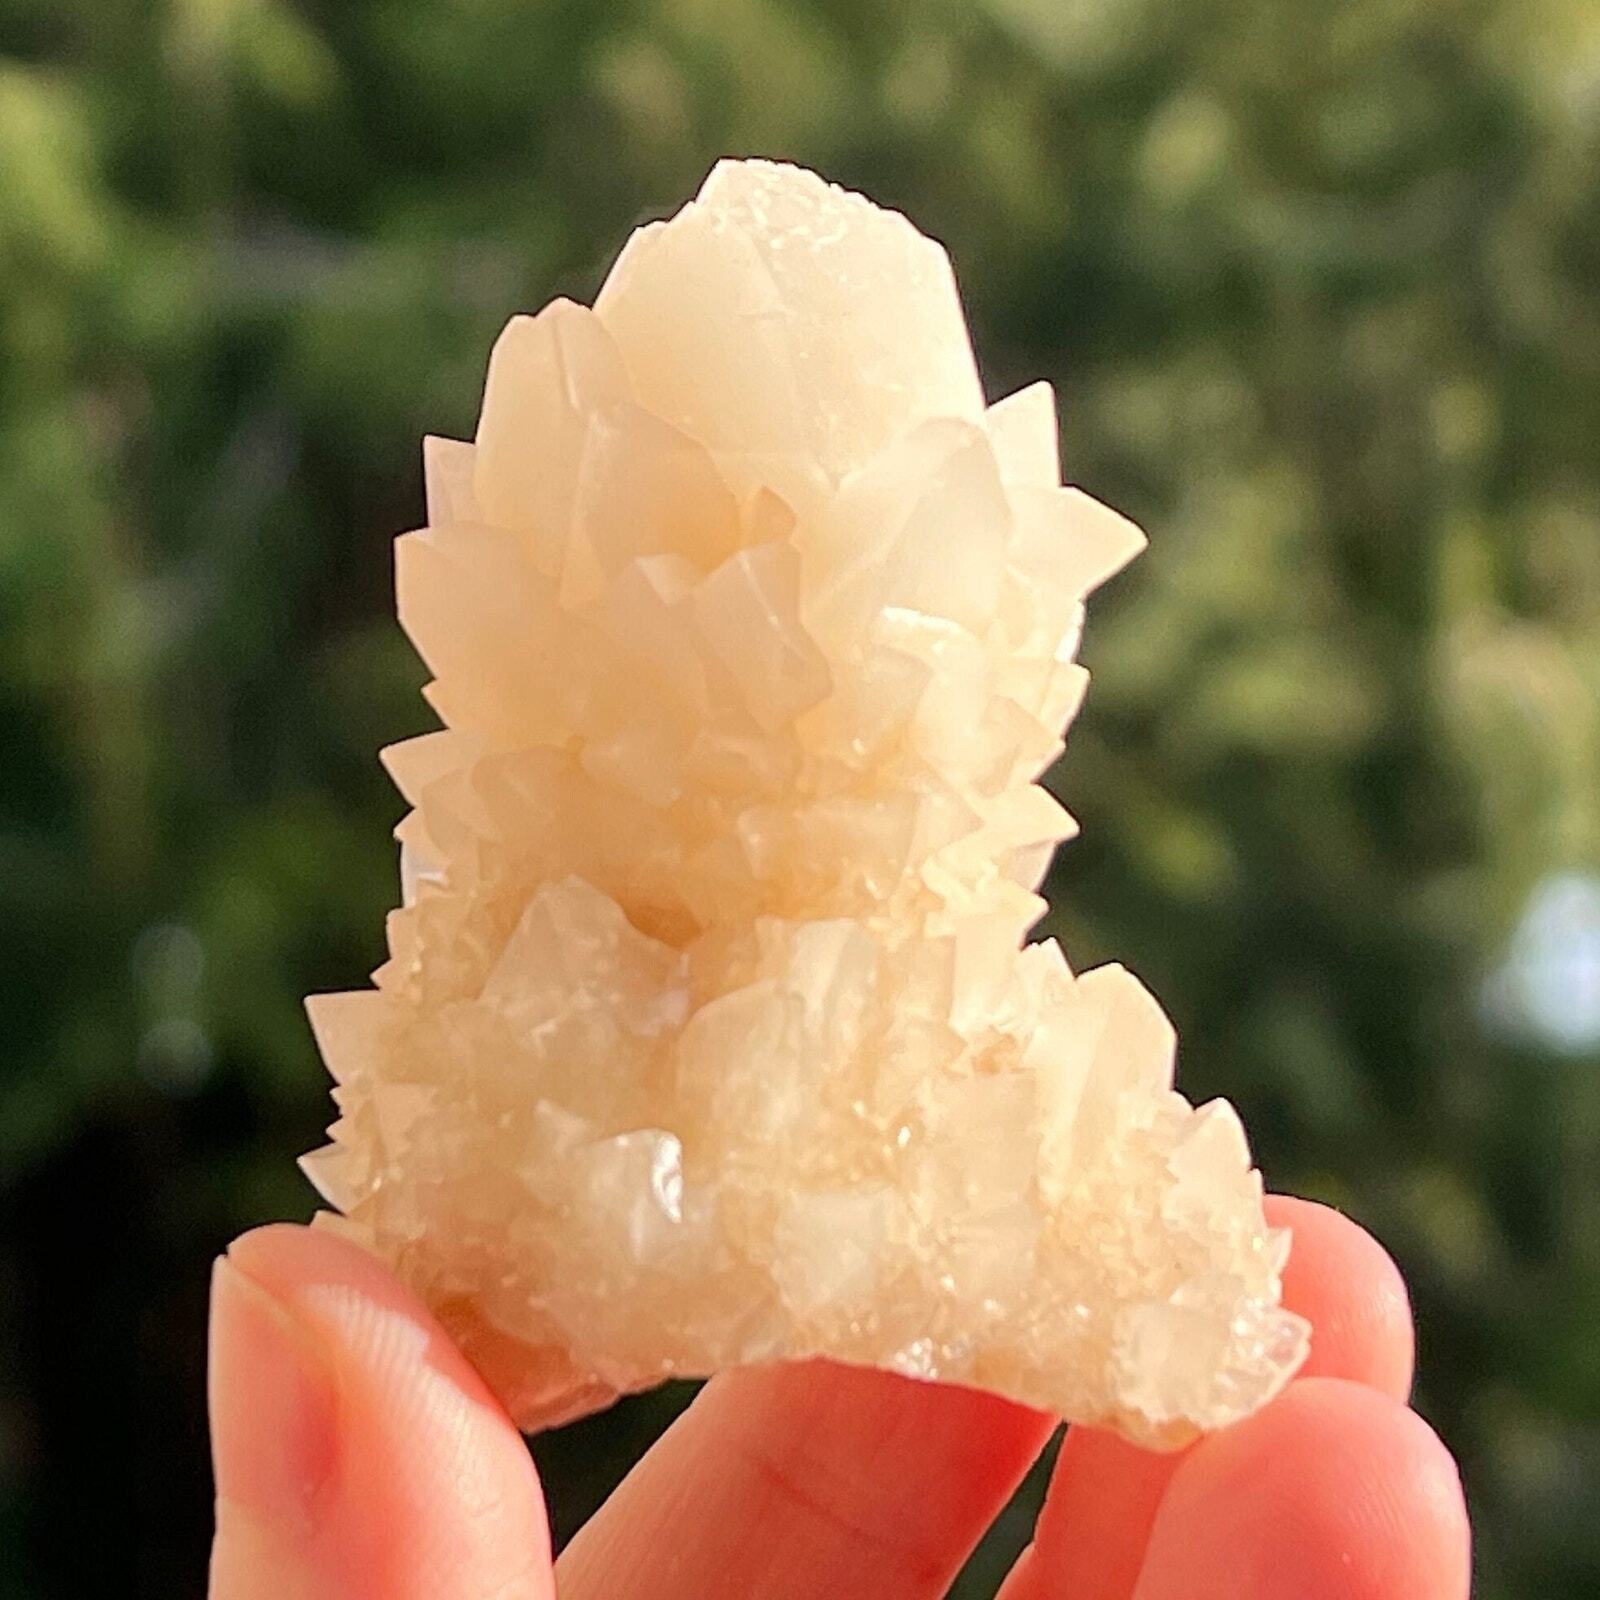 Flower Calcite - Dogtooth Crystals - from Wenshan, Yunnan, China